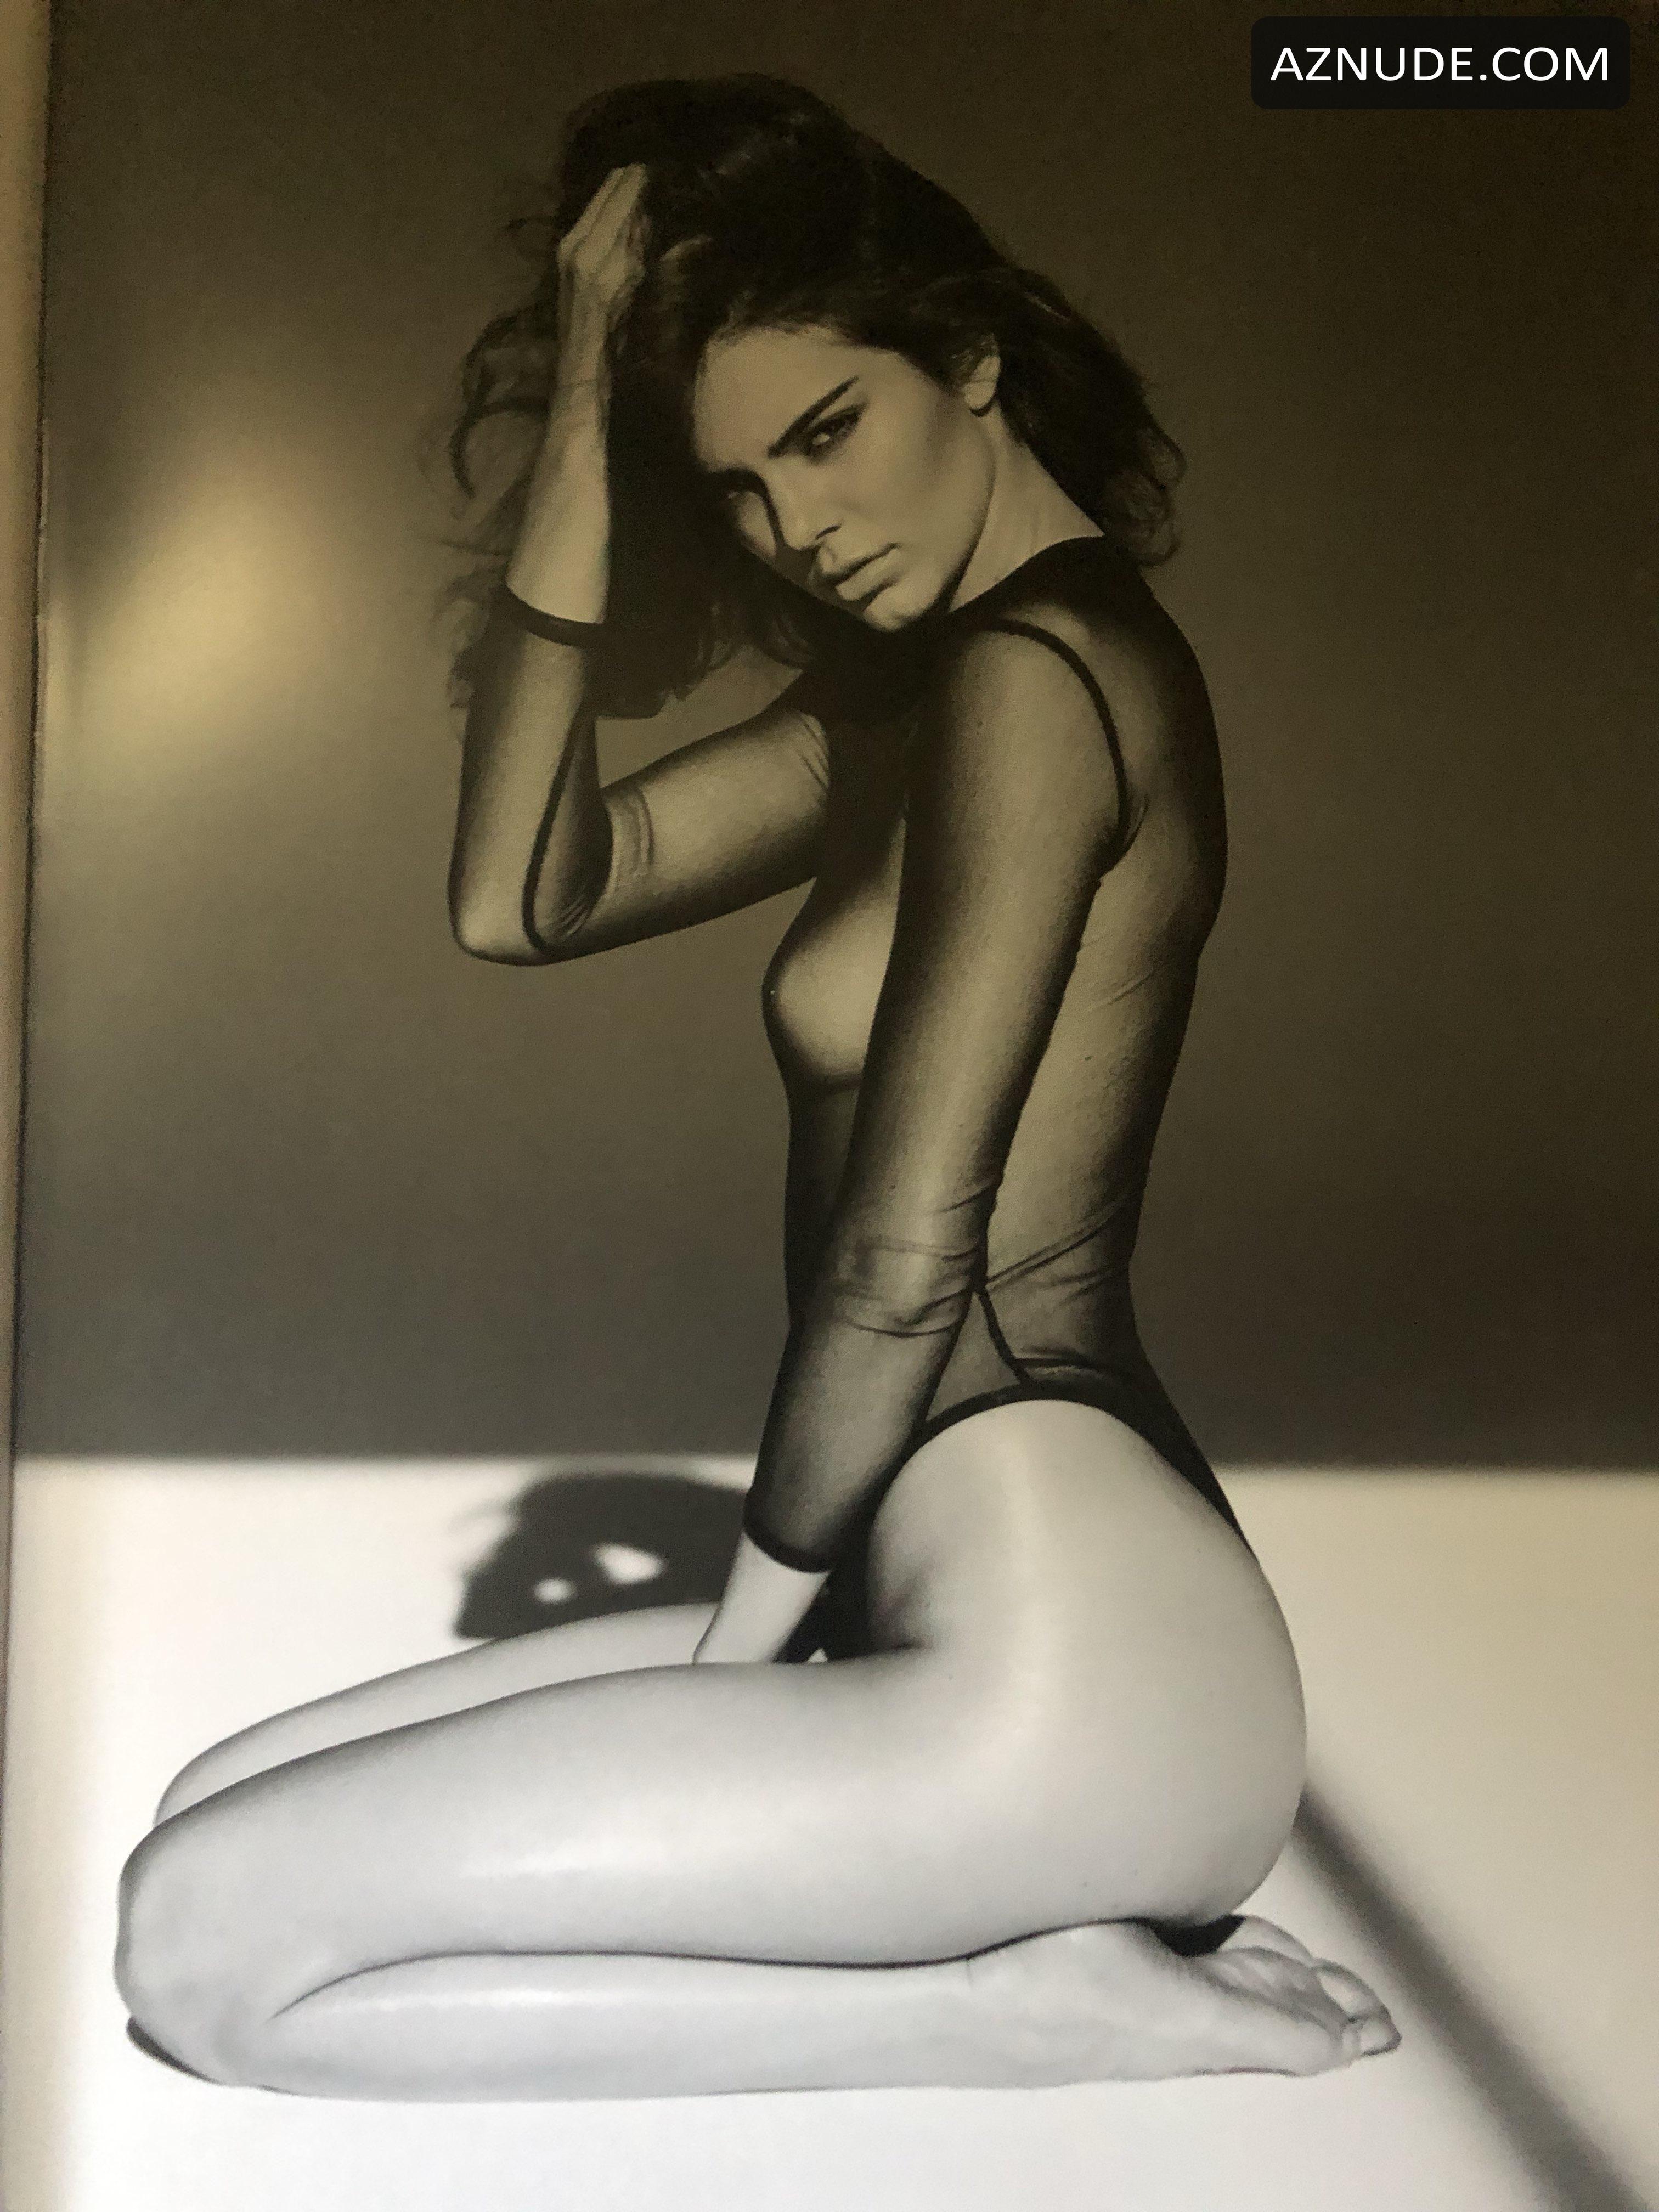 Kendall Jenner Nude In Book Angels By Russel James Aznude 